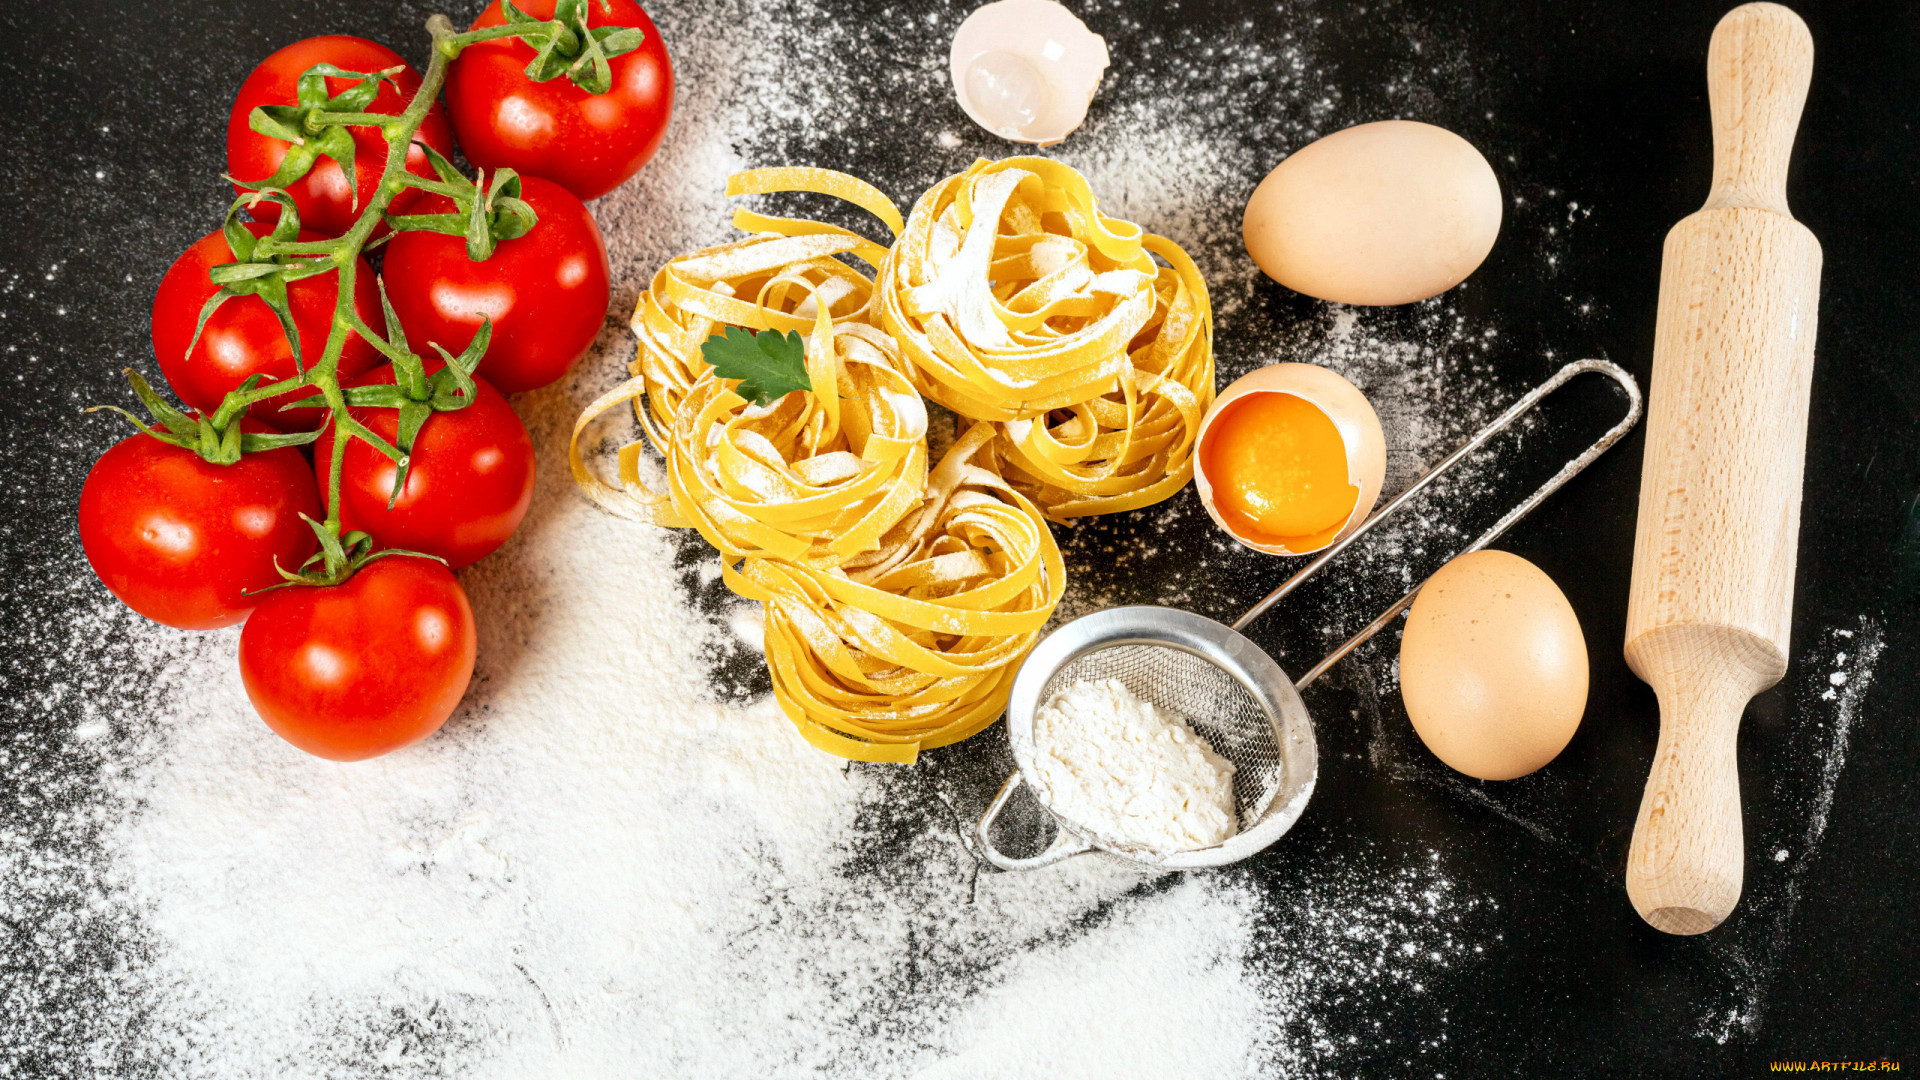 Food Tomatoes Noodles Eggs Cooking Rolling Pin Pasta Flour 1920x1080